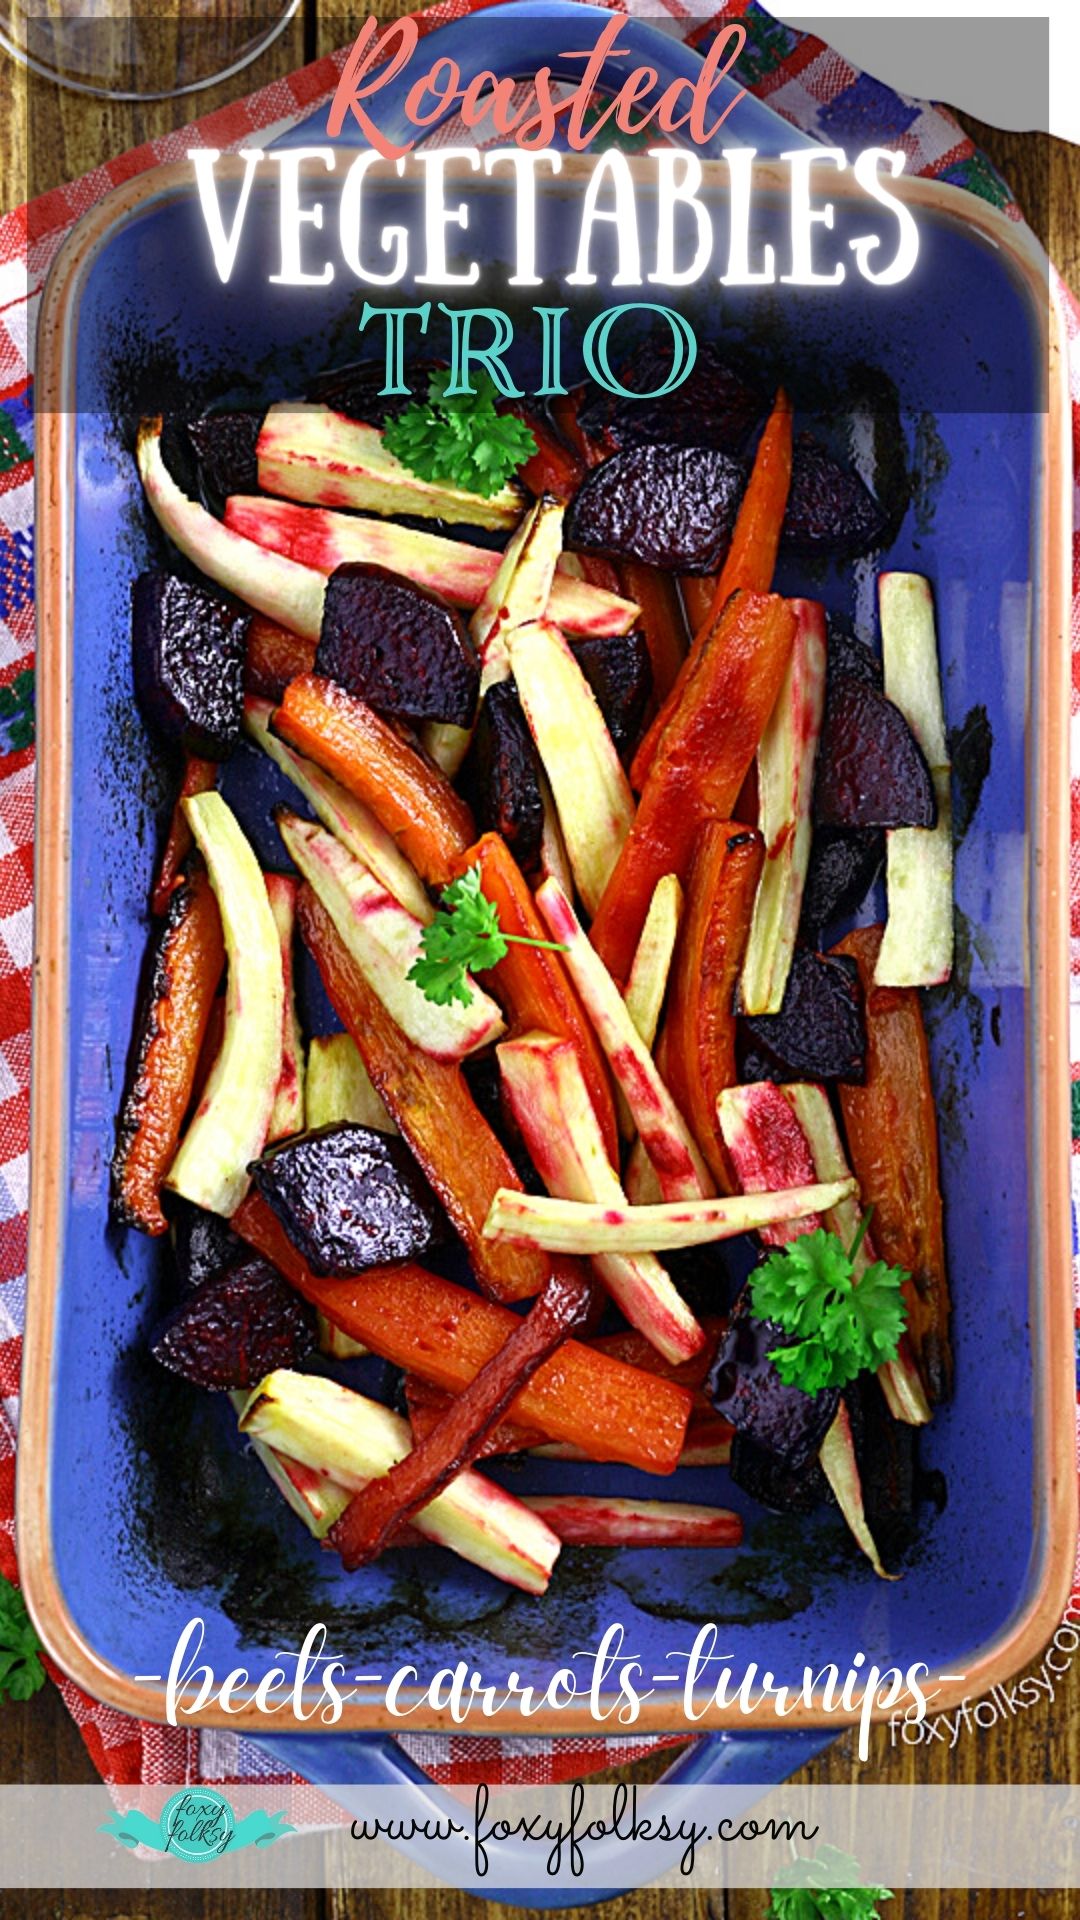 Roasted vegetable with beets, carrots, and turnips.